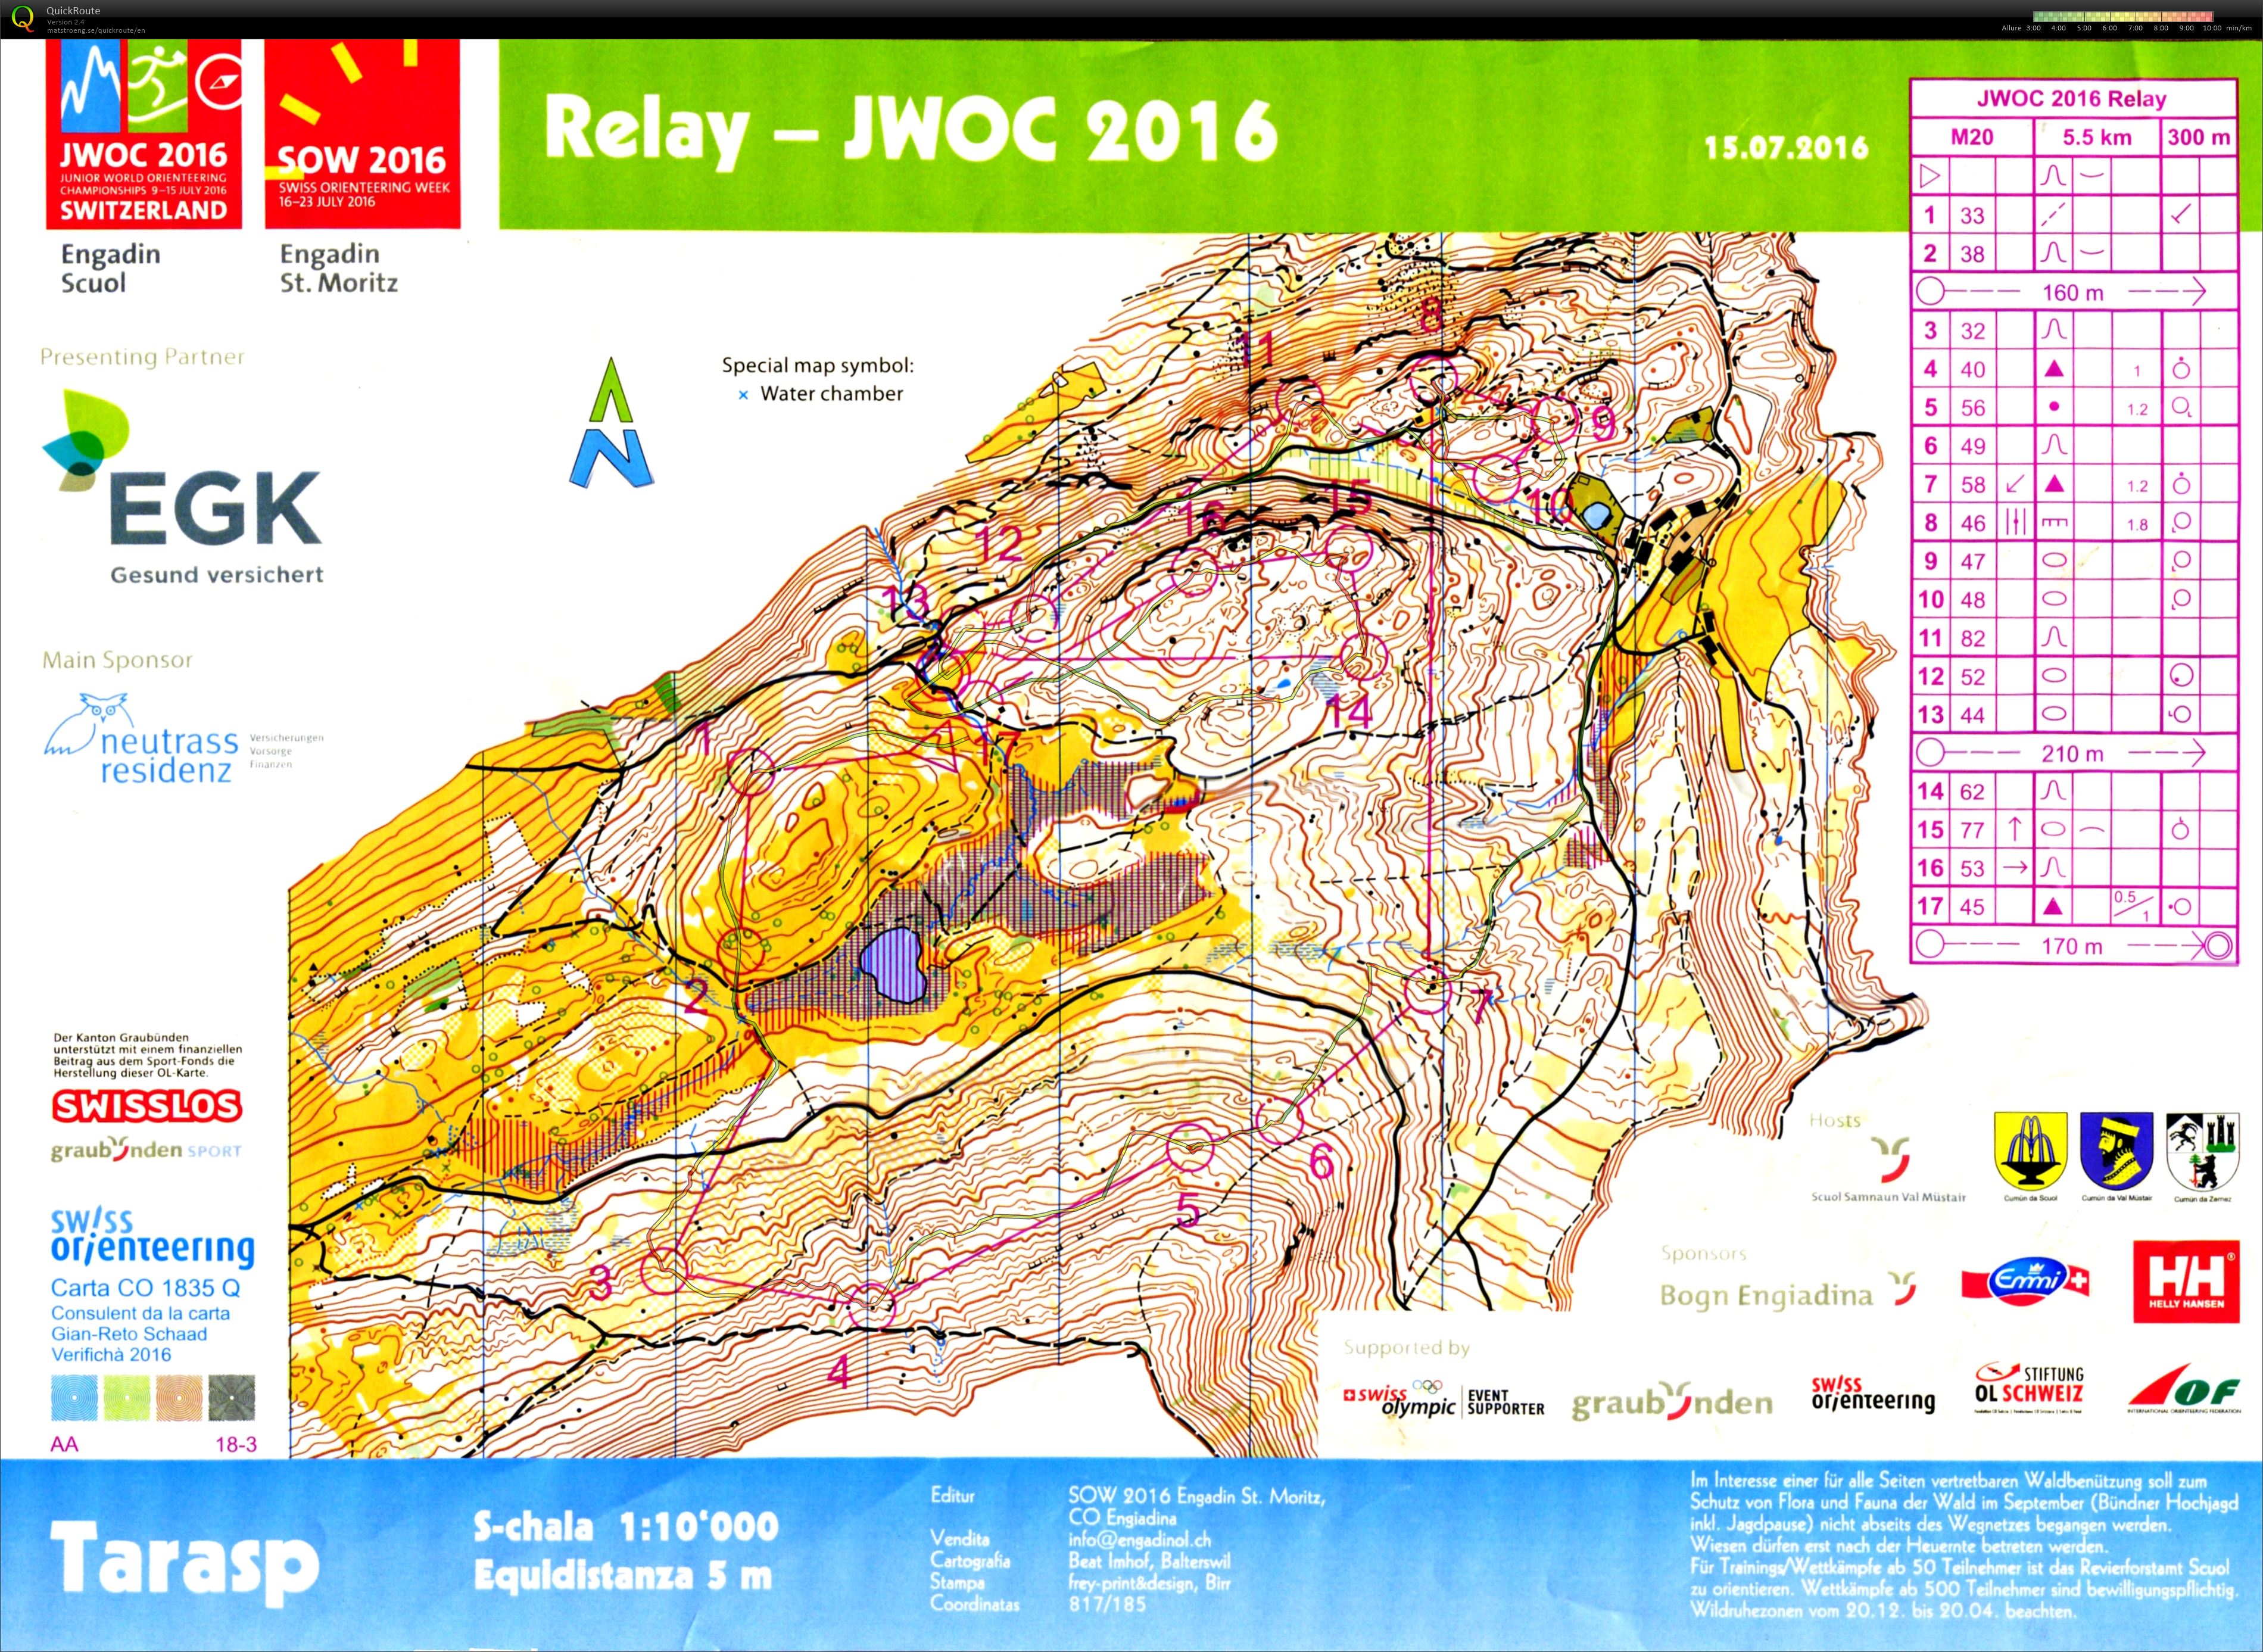 JWOC Relay for training (15-07-2016)